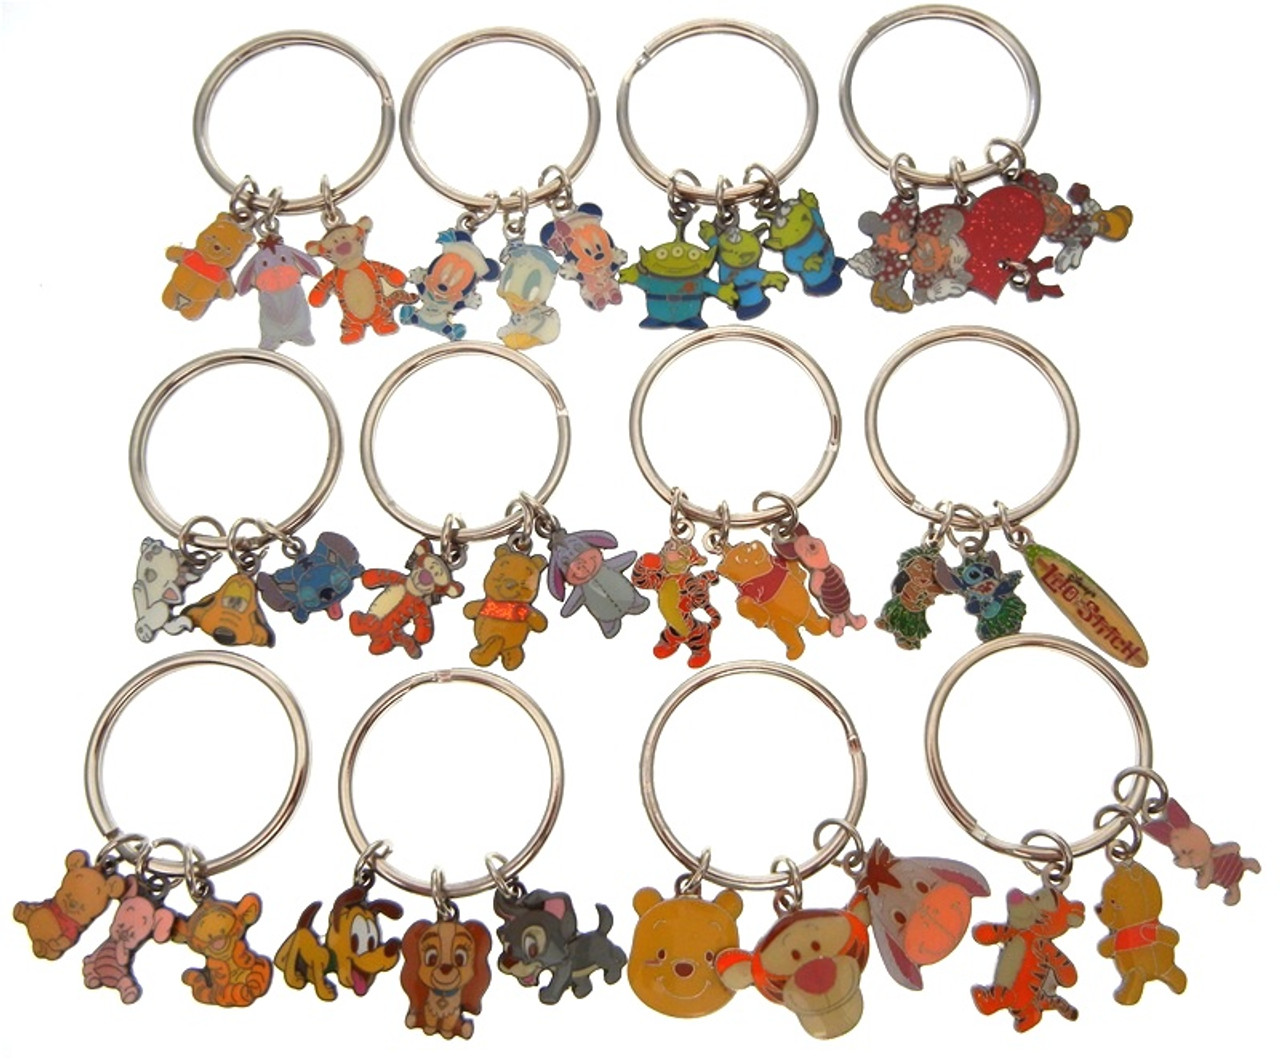 Disney Keychains Collection: The Perfect Gift for Your Loved Ones